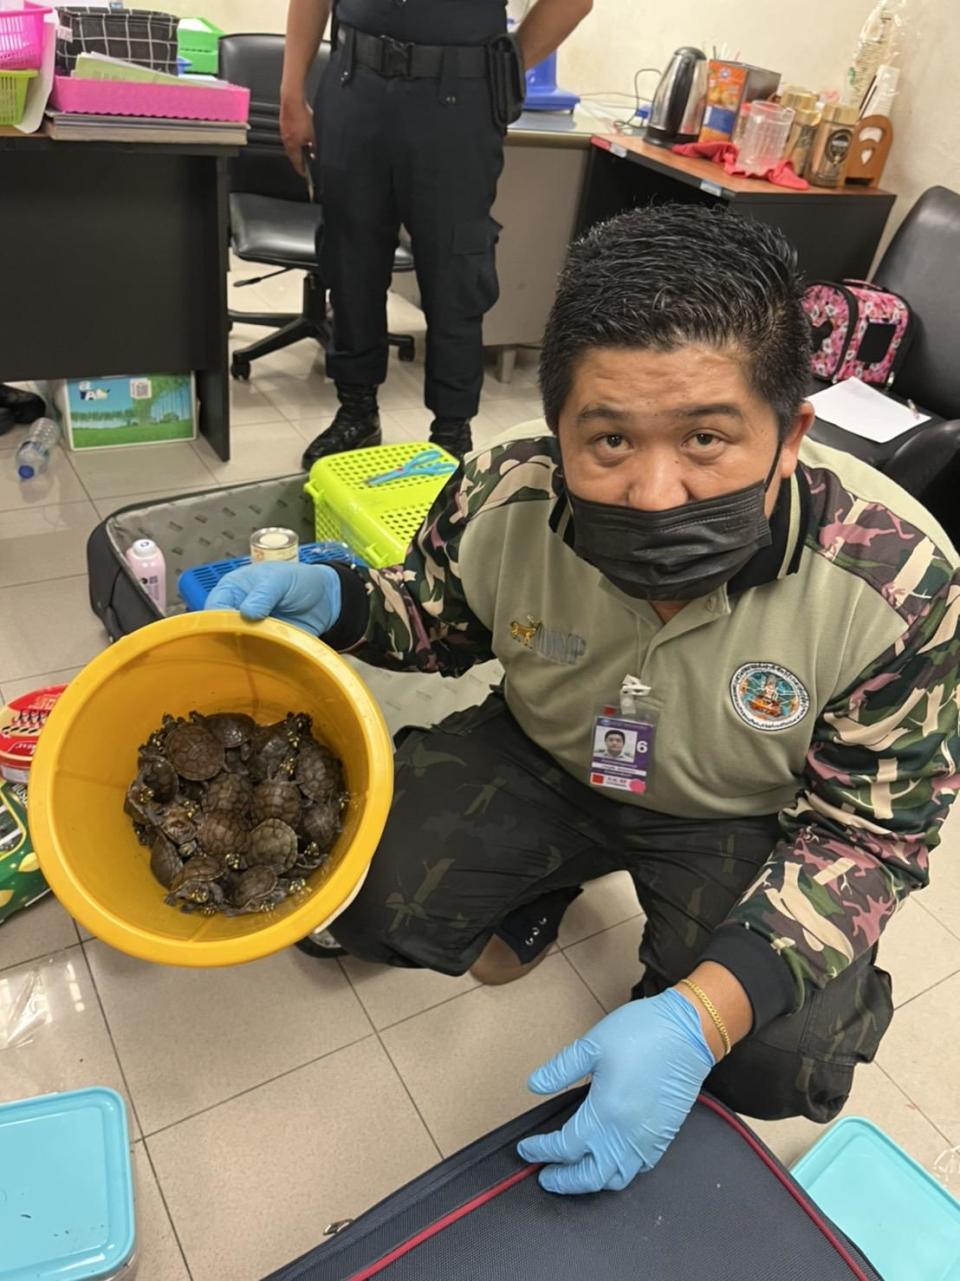 Investigators found 2 white porcupines, 2 armadillos, 35 turtles, 50 chameleons and 20 snakes, according to the press release. / Credit: Thailand DNP